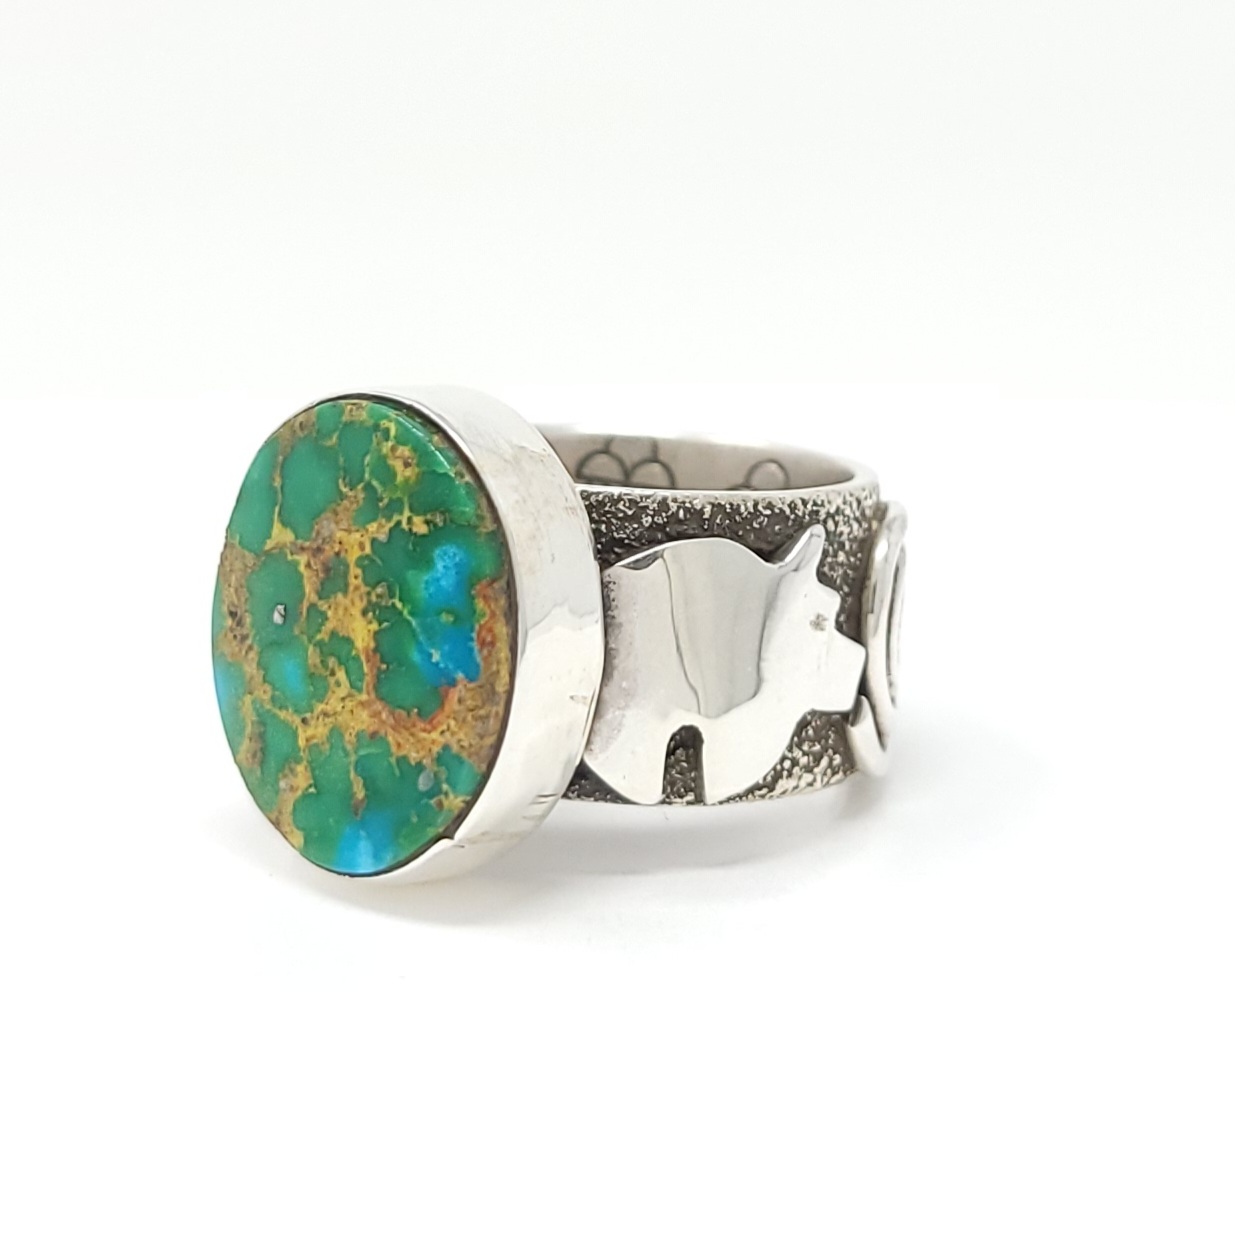 Alex Sanchez Navajo Sterling Silver Petroglyph Band Ring Sonoran Gold Turquoise